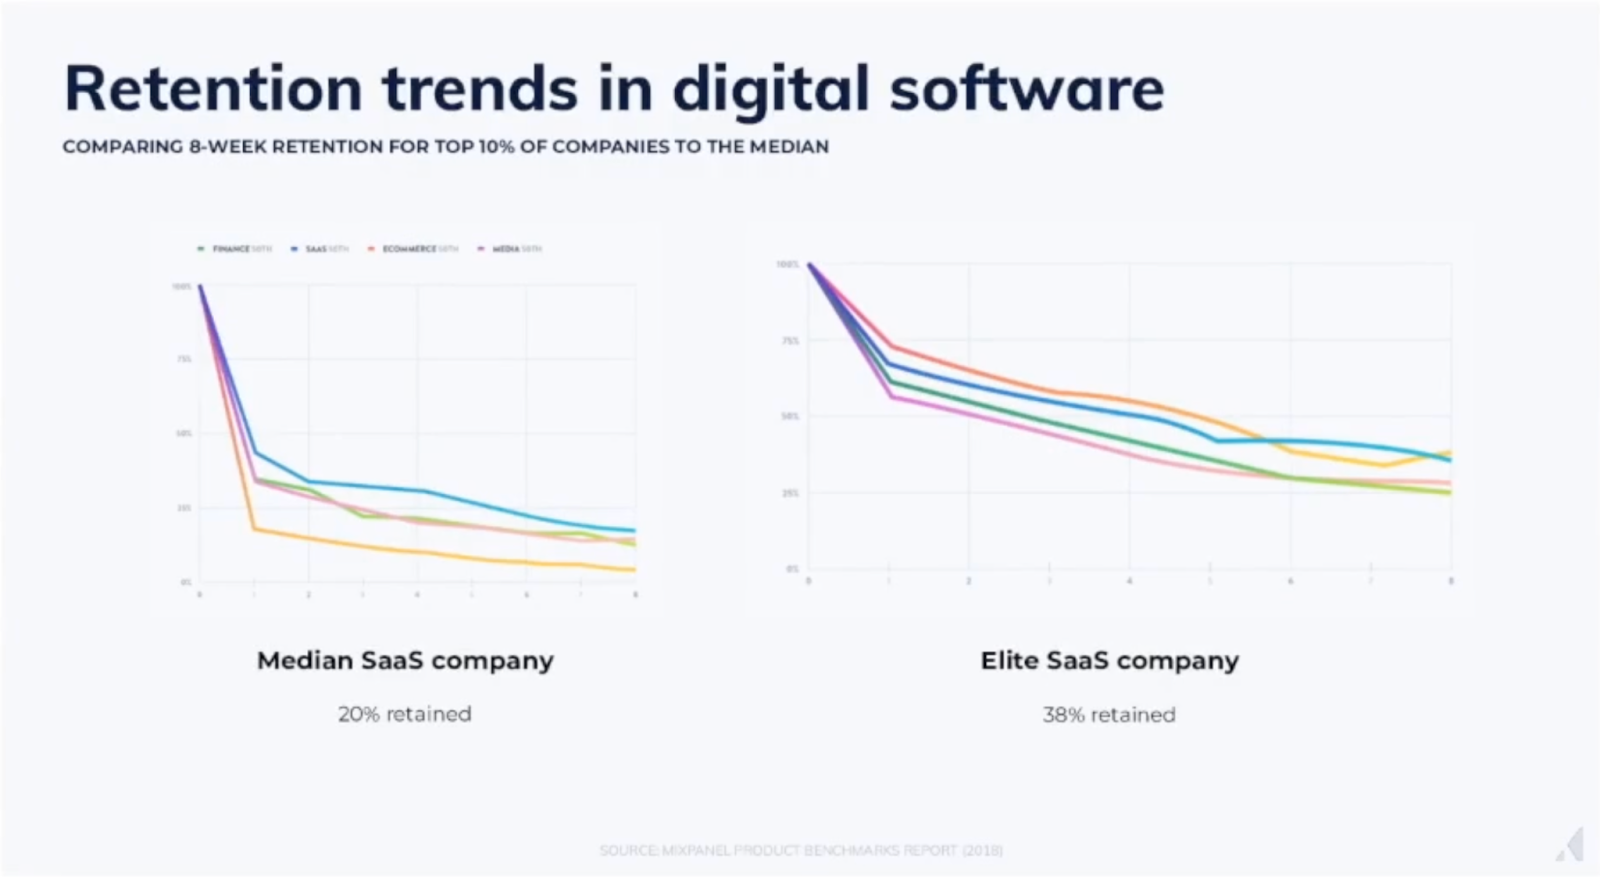 Graphs showing retention trends in digital software.